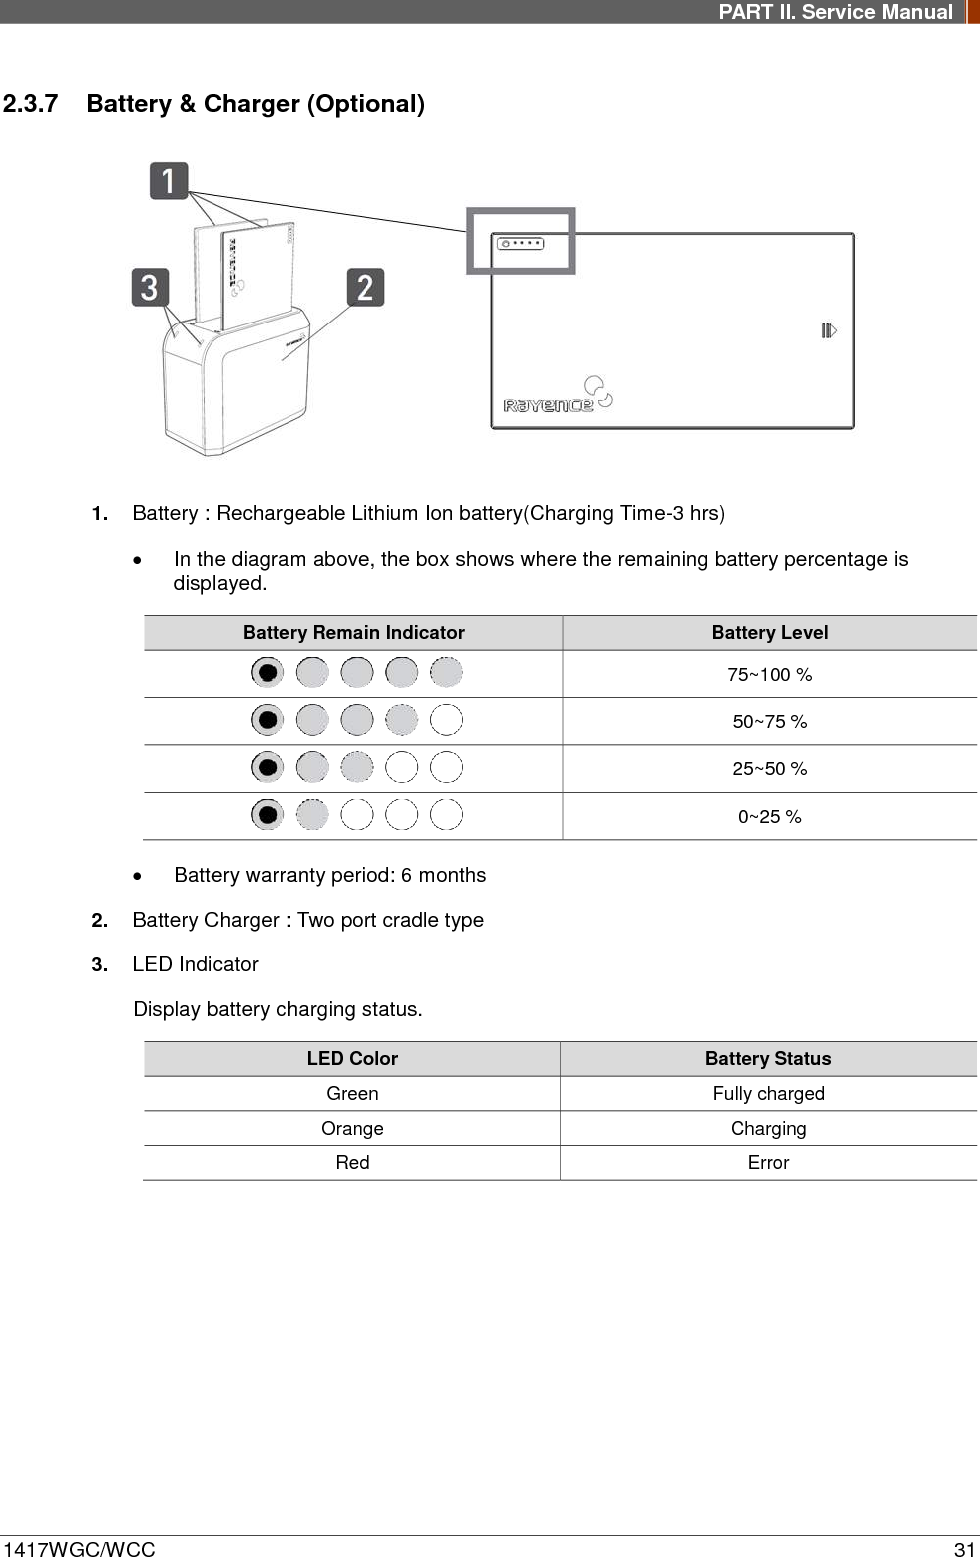 PART II. Service Manual  1417WGC/WCC 31 2.3.7 Battery &amp; Charger (Optional)  1. Battery : Rechargeable Lithium Ion battery(Charging Time-3 hrs) • In the diagram above, the box shows where the remaining battery percentage is displayed. Battery Remain Indicator Battery Level  75~100 %  50~75 %  25~50 %  0~25 % • Battery warranty period: 6 months 2. Battery Charger : Two port cradle type 3. LED Indicator Display battery charging status. LED Color Battery Status Green Fully charged Orange Charging Red  Error   